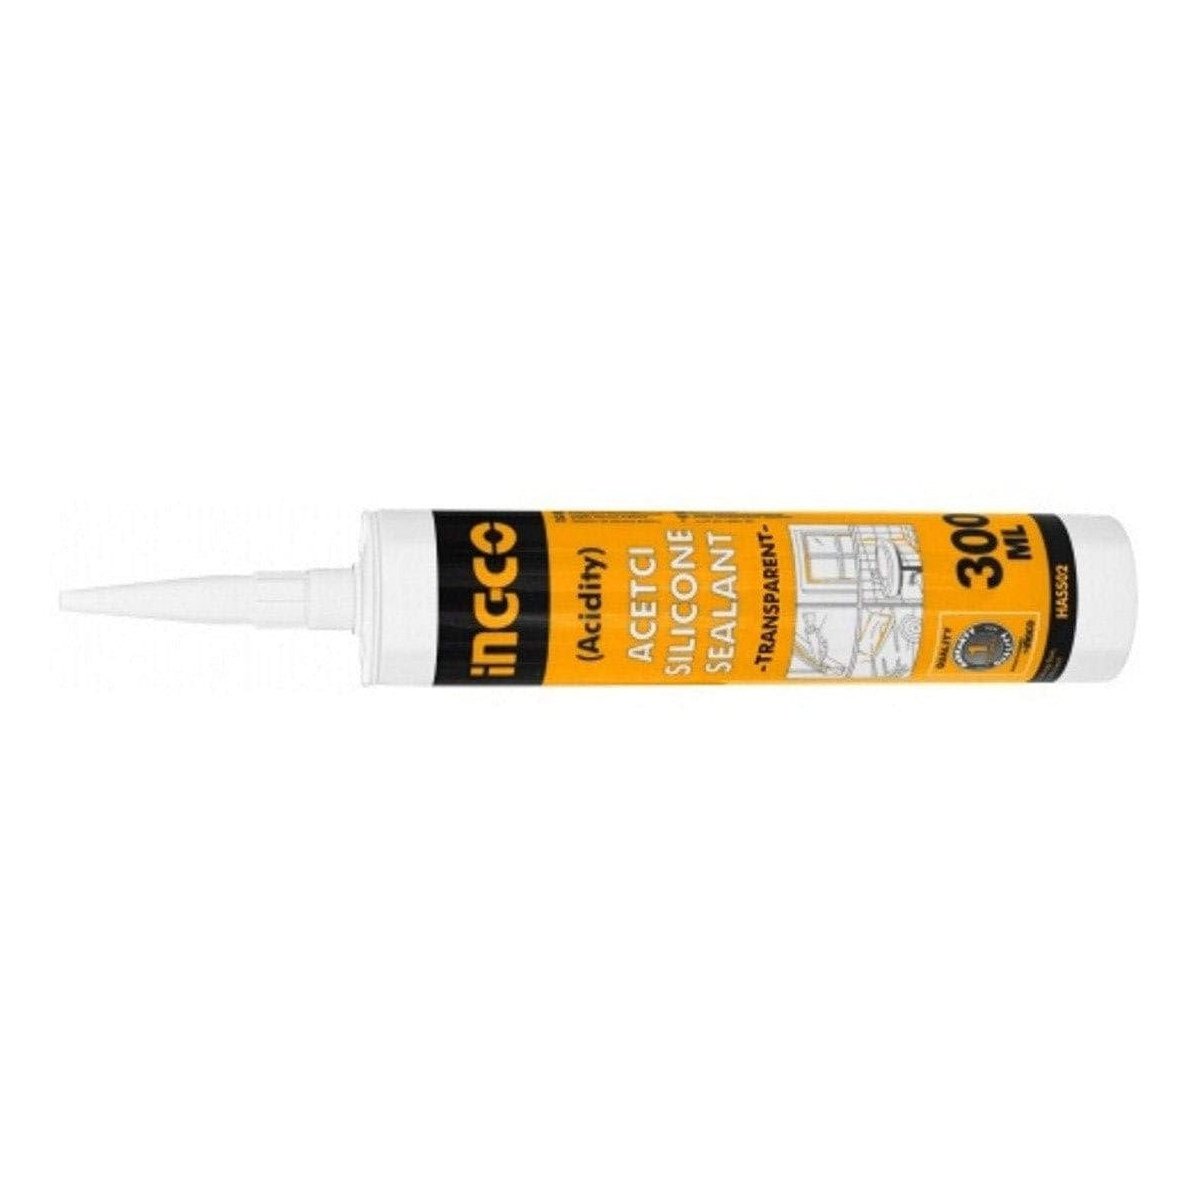 Ingco Acetic Silicone Sealant - White, Black & Transparent | Supply Master | Accra, Ghana Hardware Building Steel Engineering Hardware tool